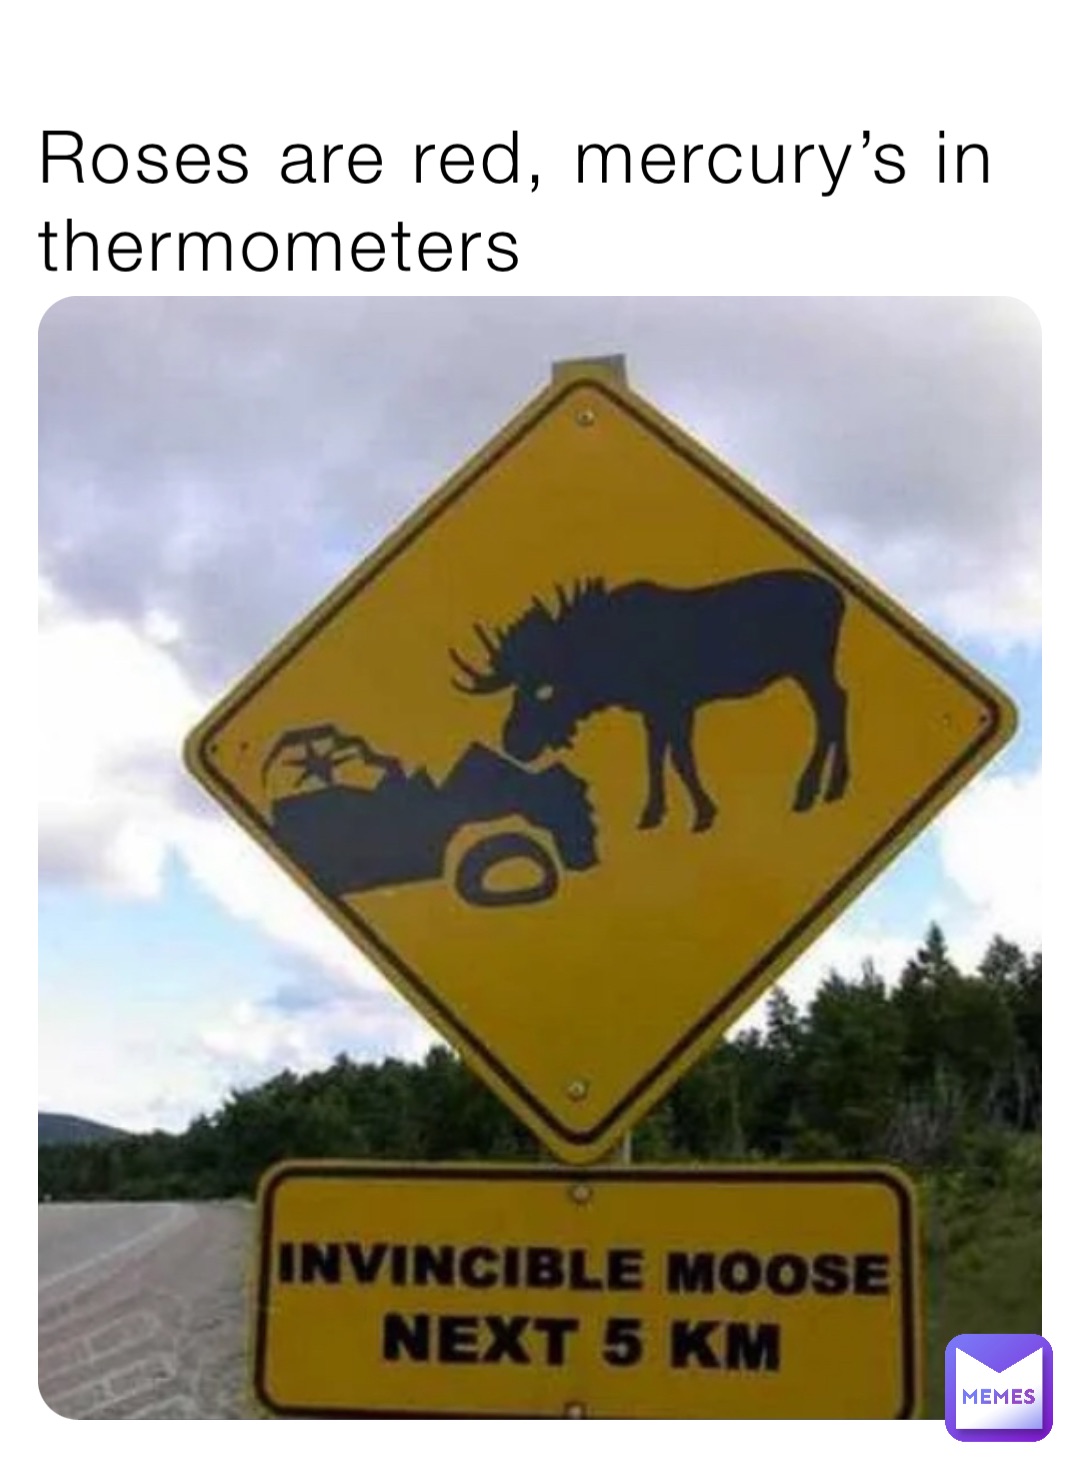 Roses are red, mercury’s in thermometers